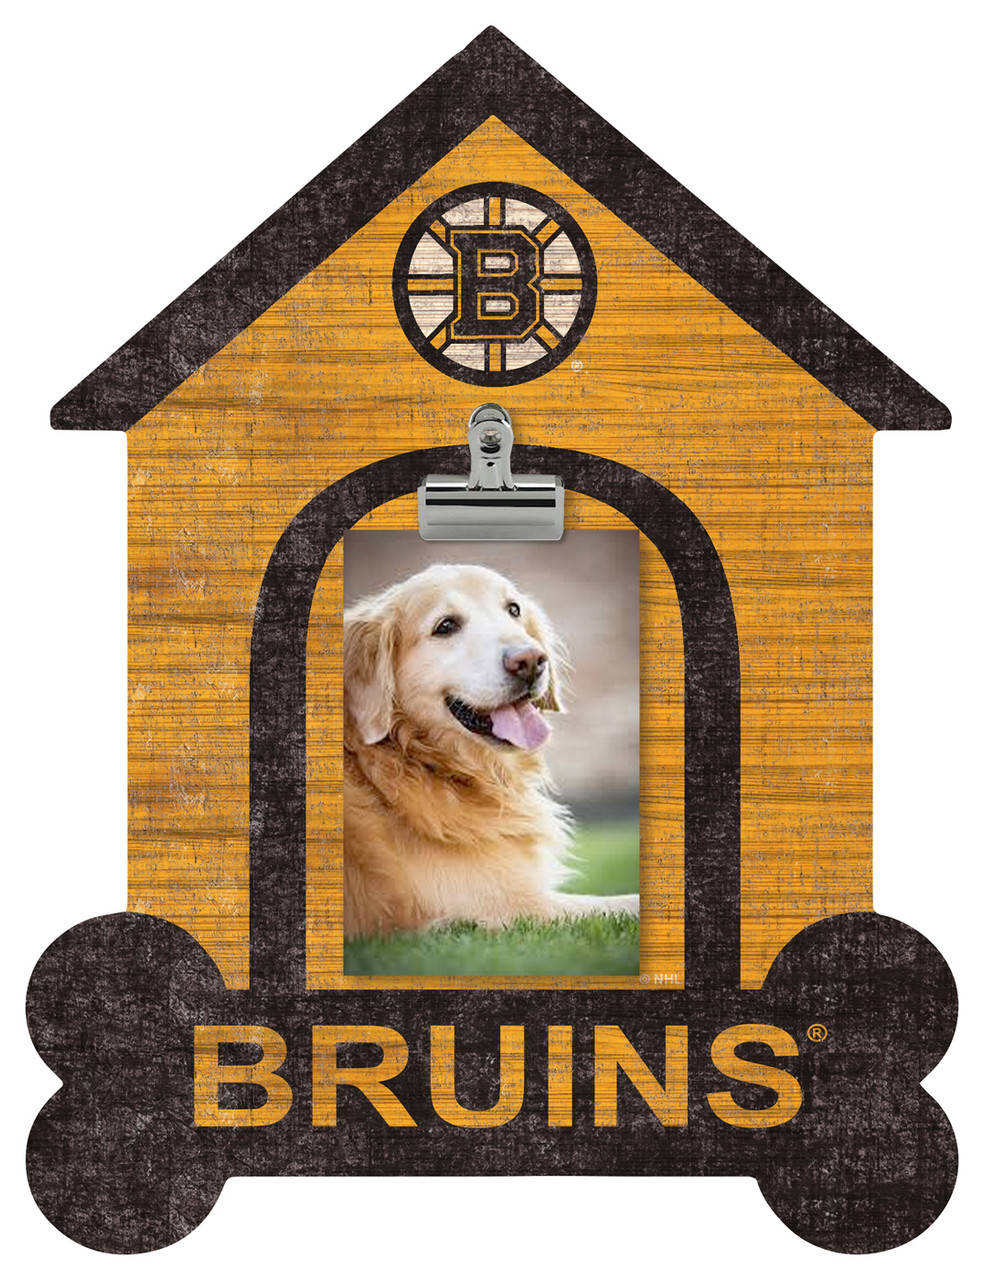 Boston Bruins sports pet supplies for dogs